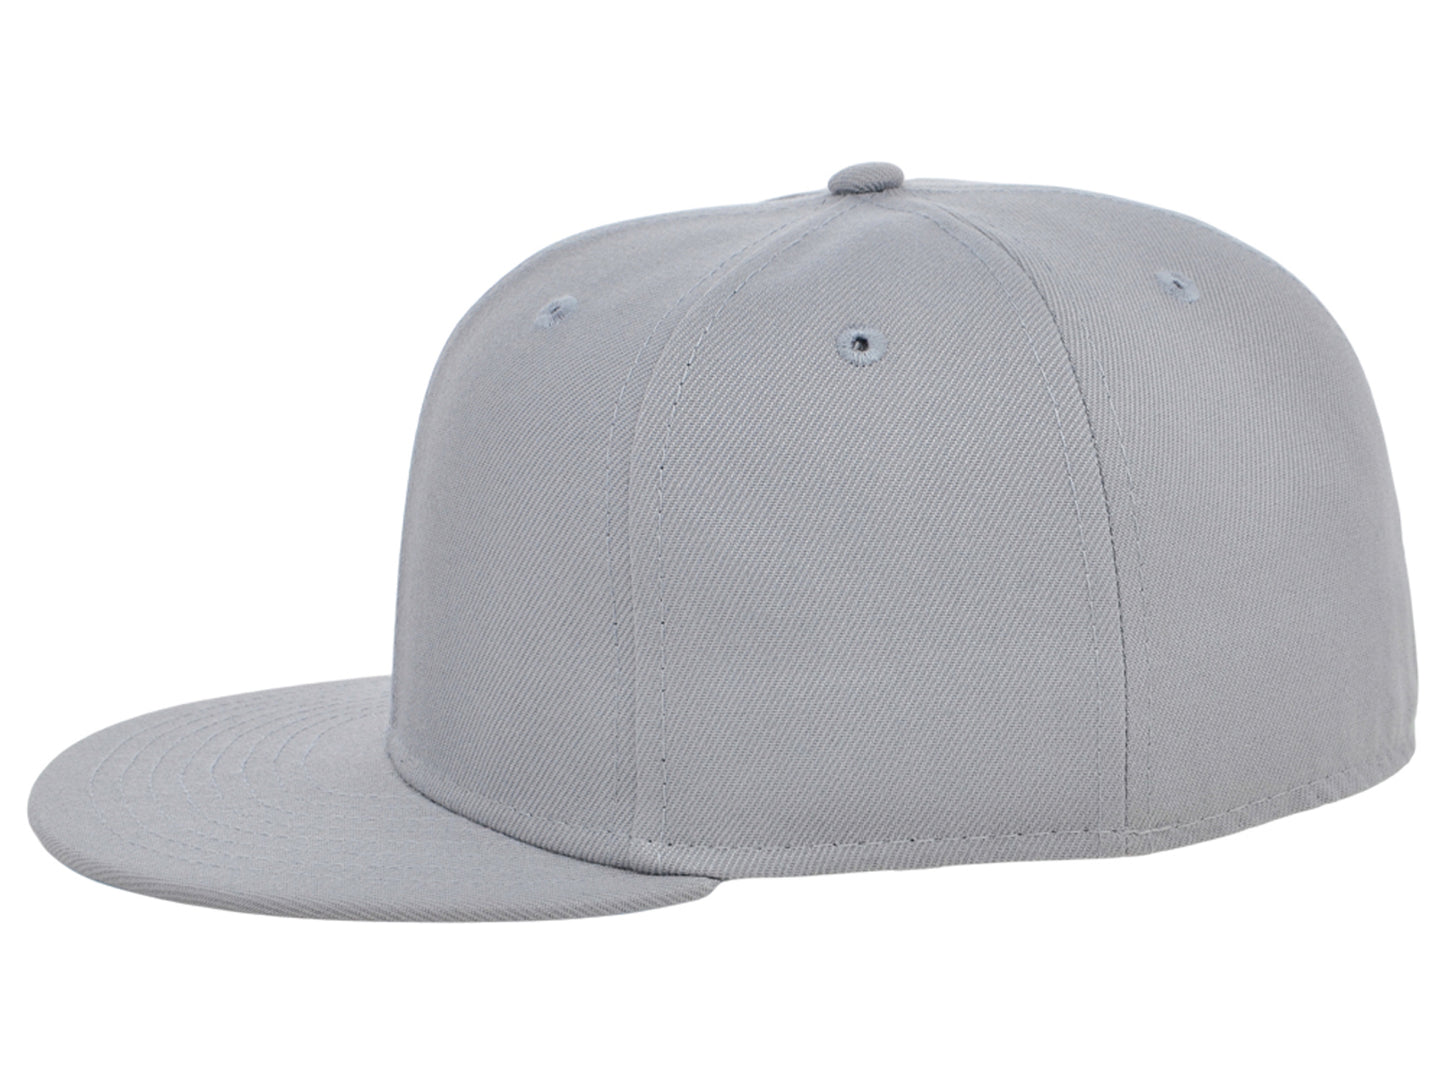 Crowns By Lids Full Court Fitted UV Cap - Light Grey/Sky Blue